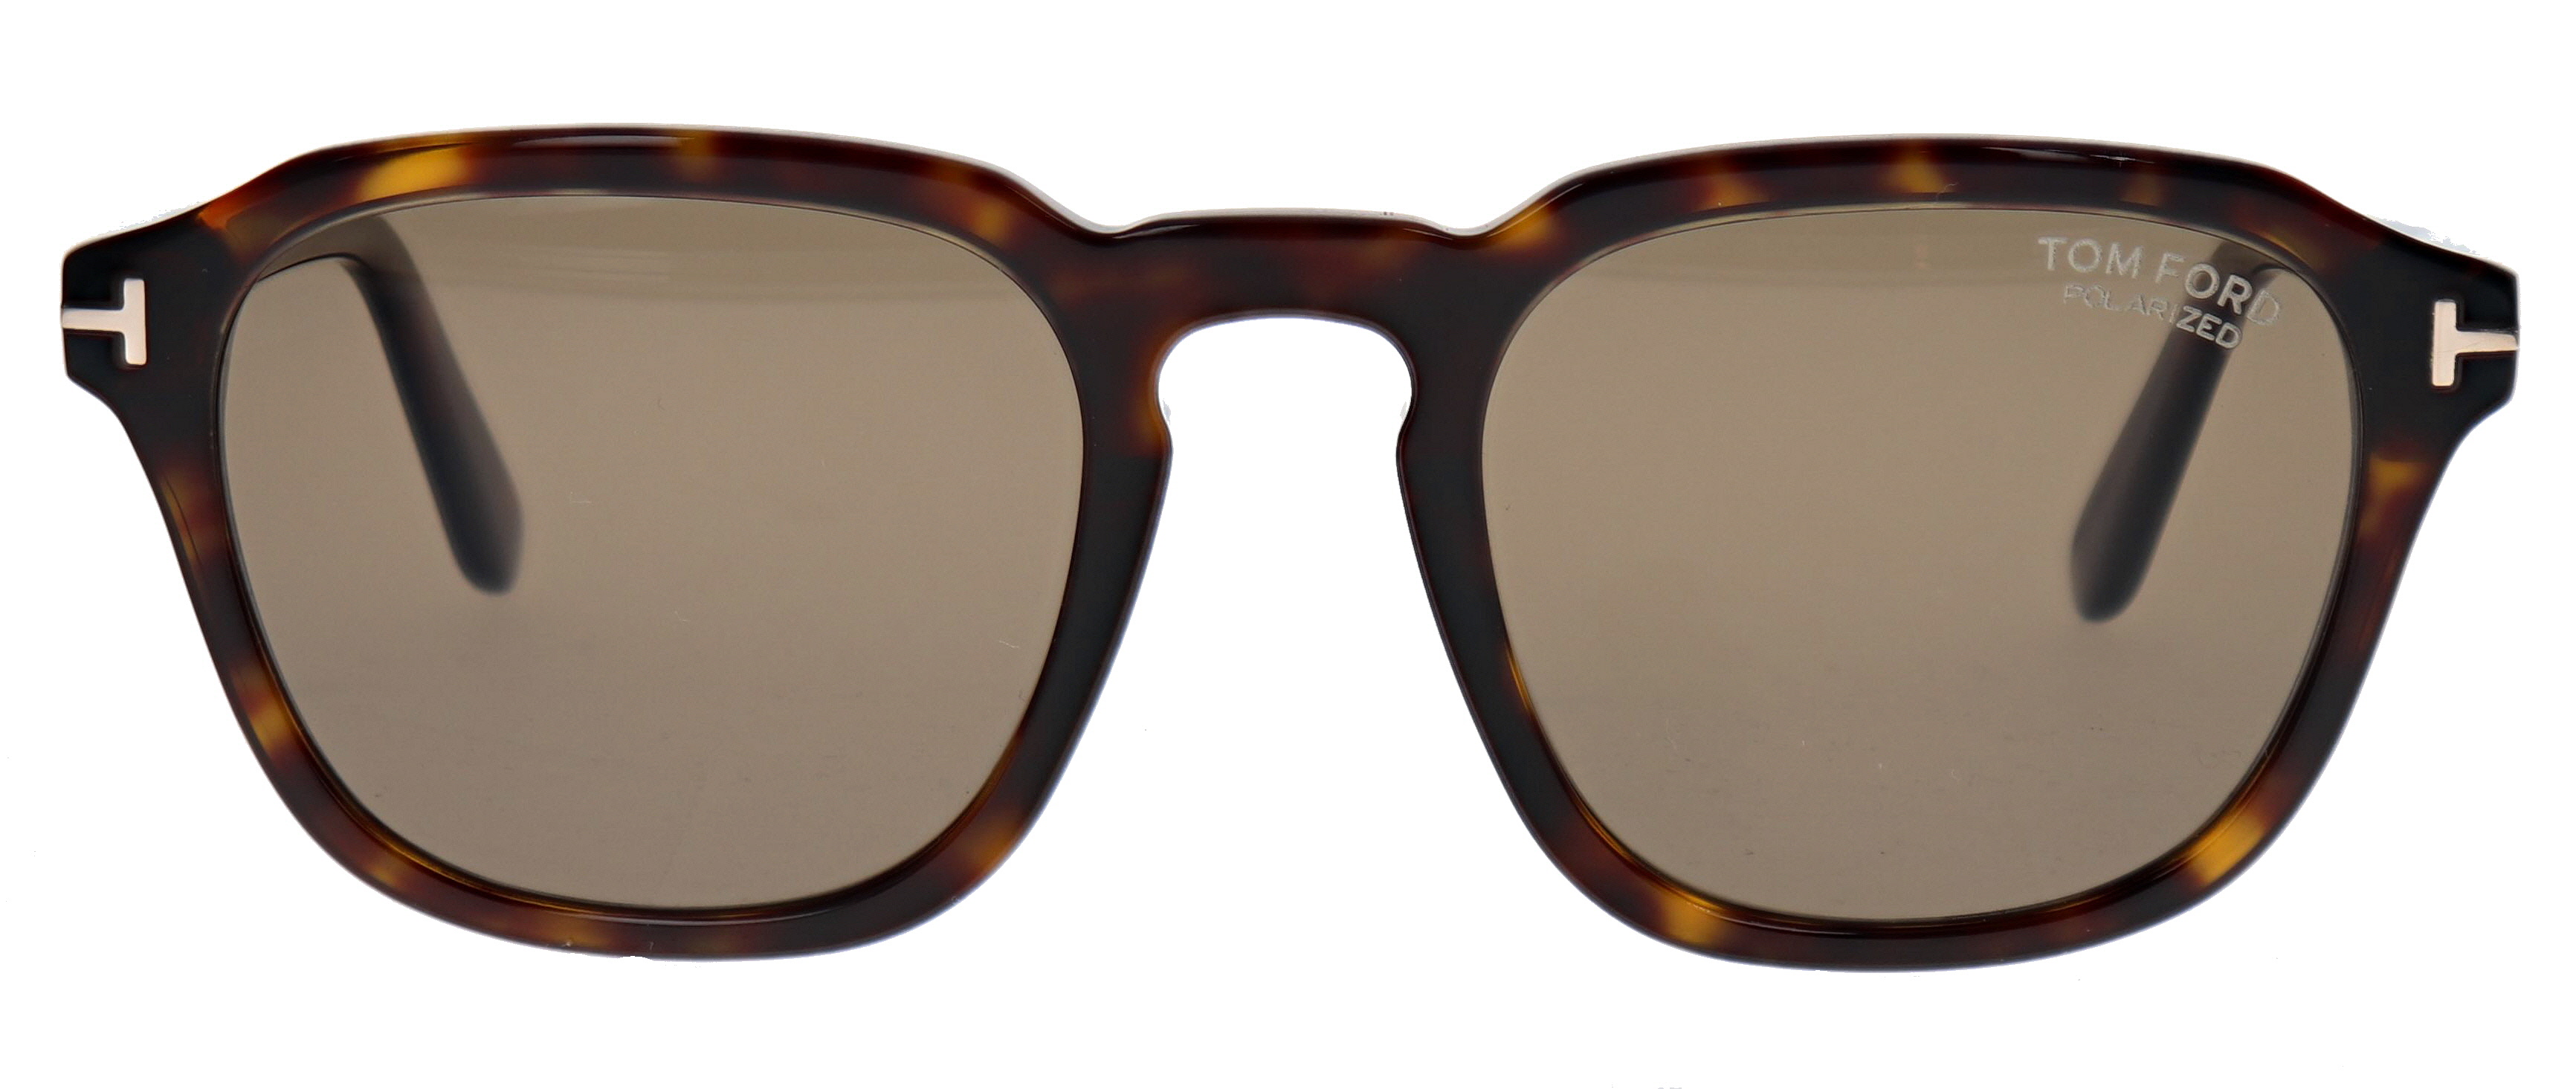 Tom Ford Avery TF931 Polorized